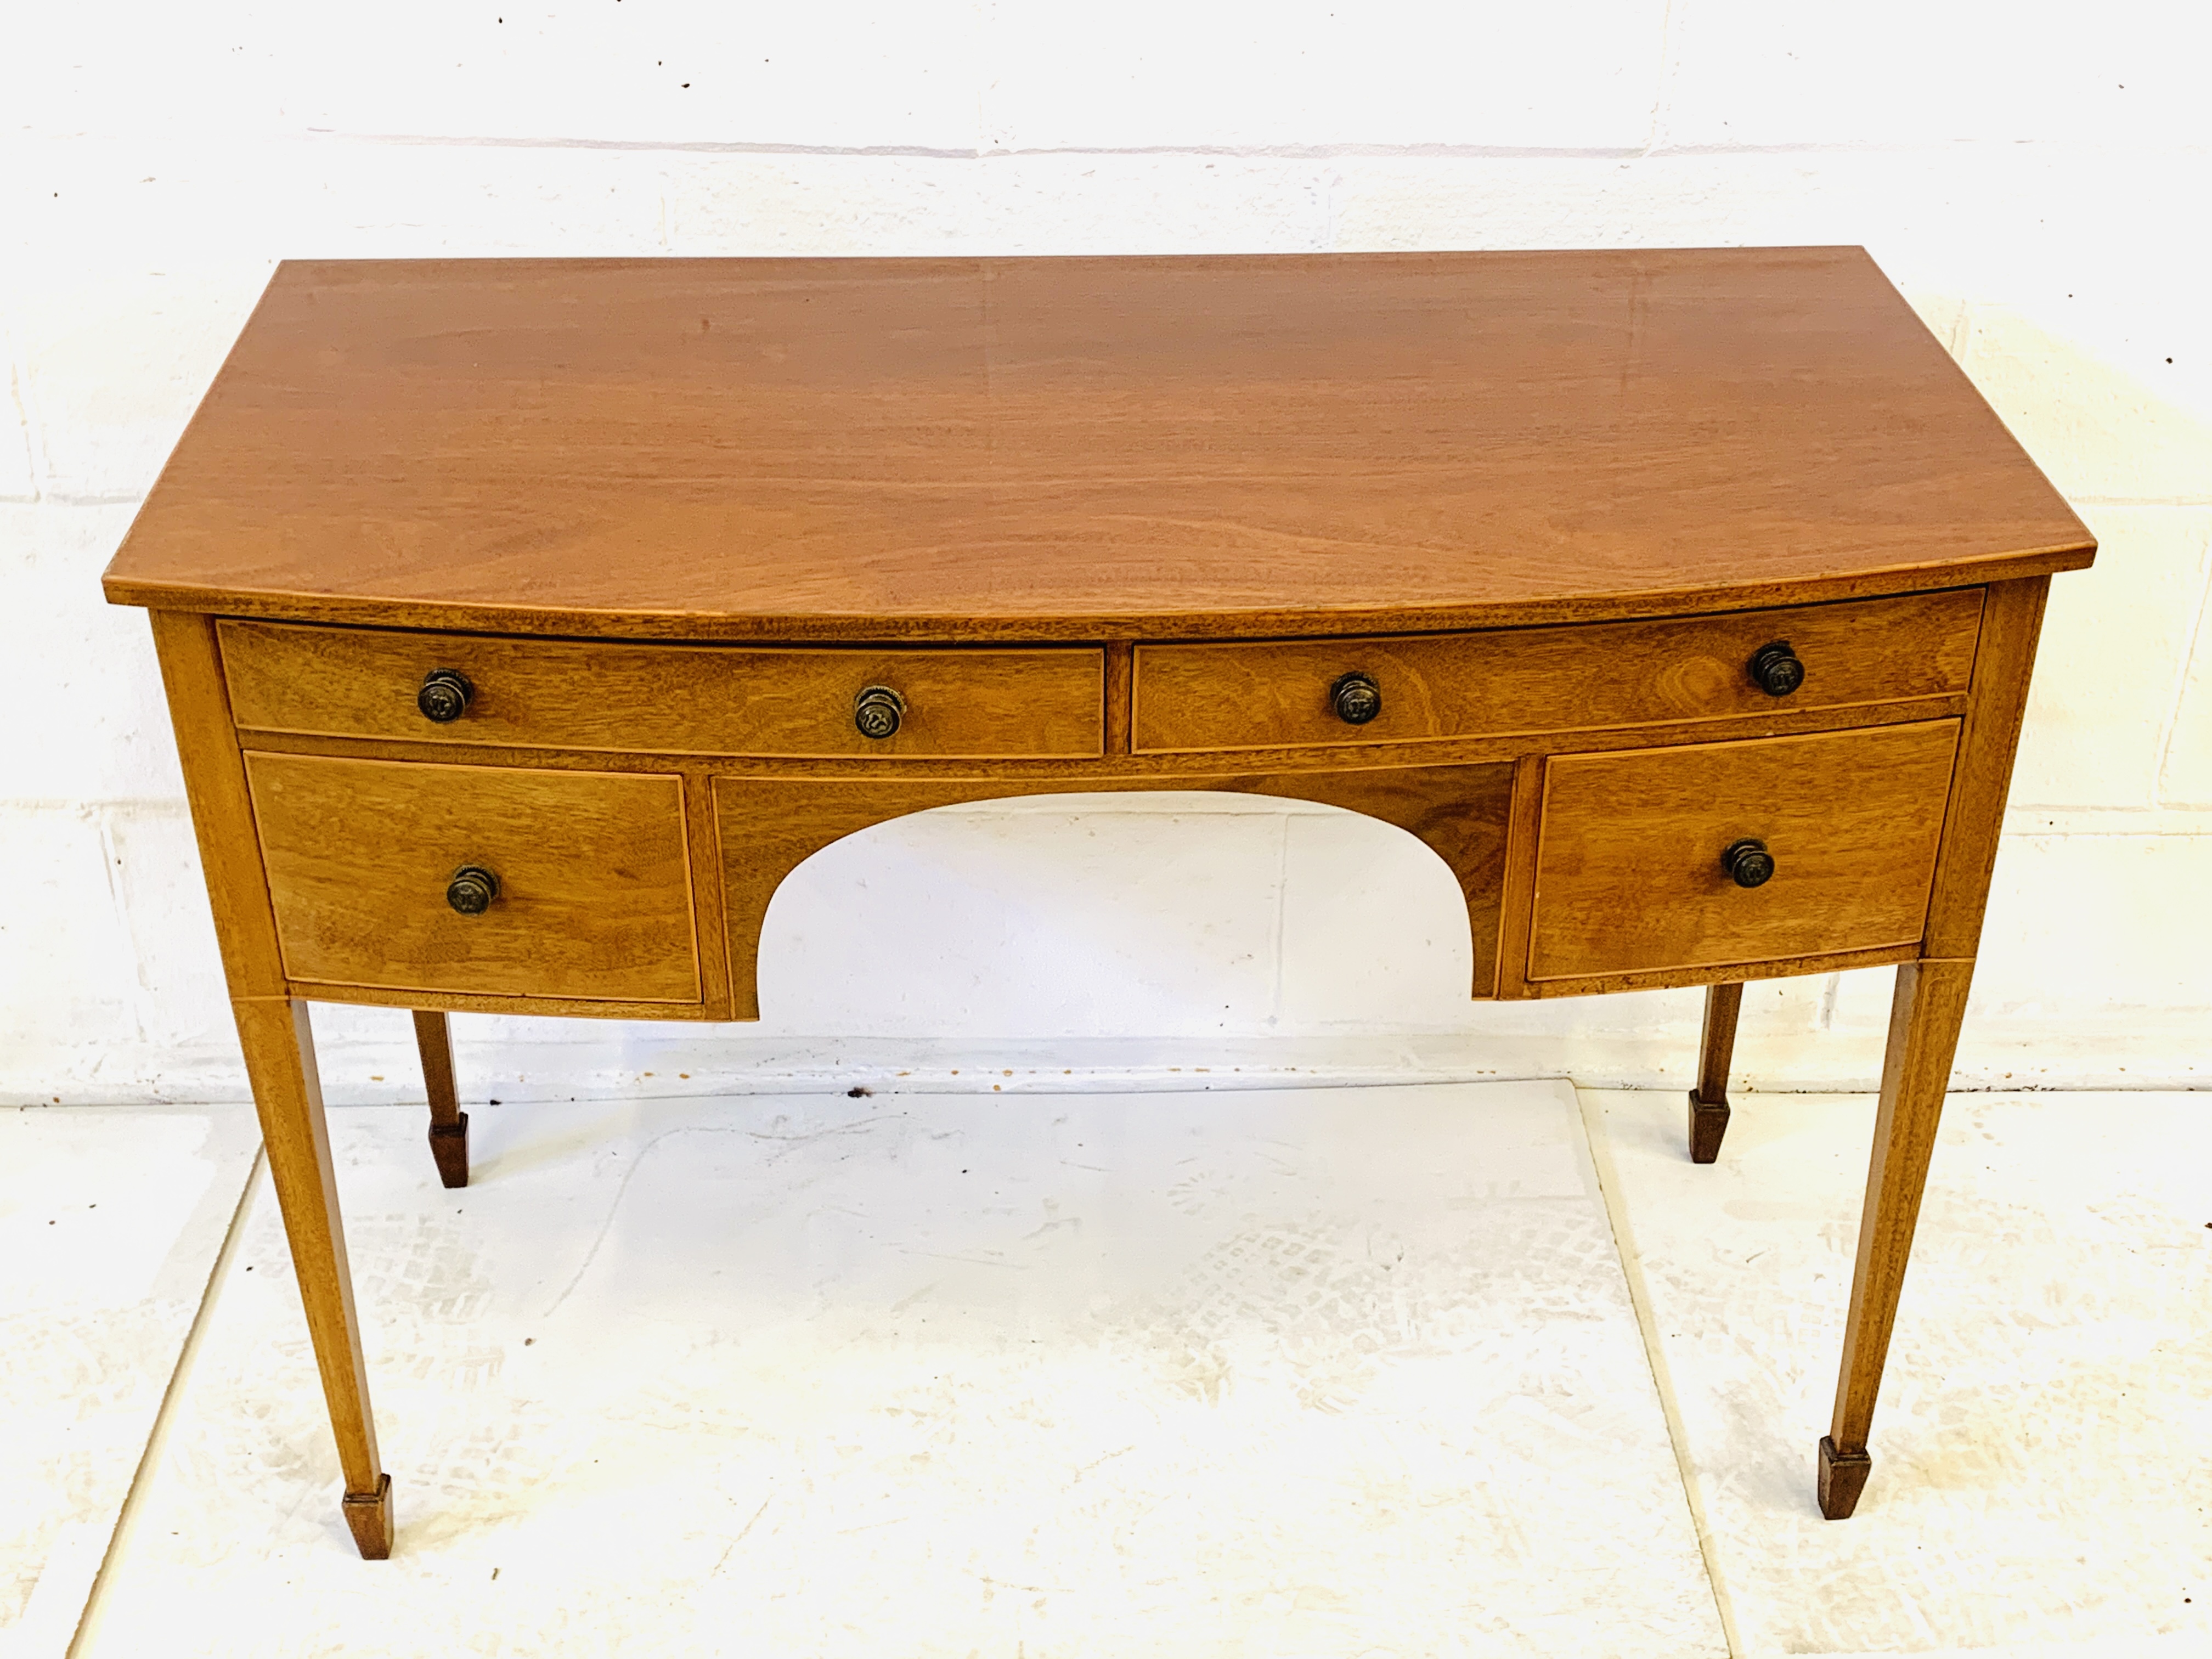 Mahogany bow fronted desk - Image 2 of 6